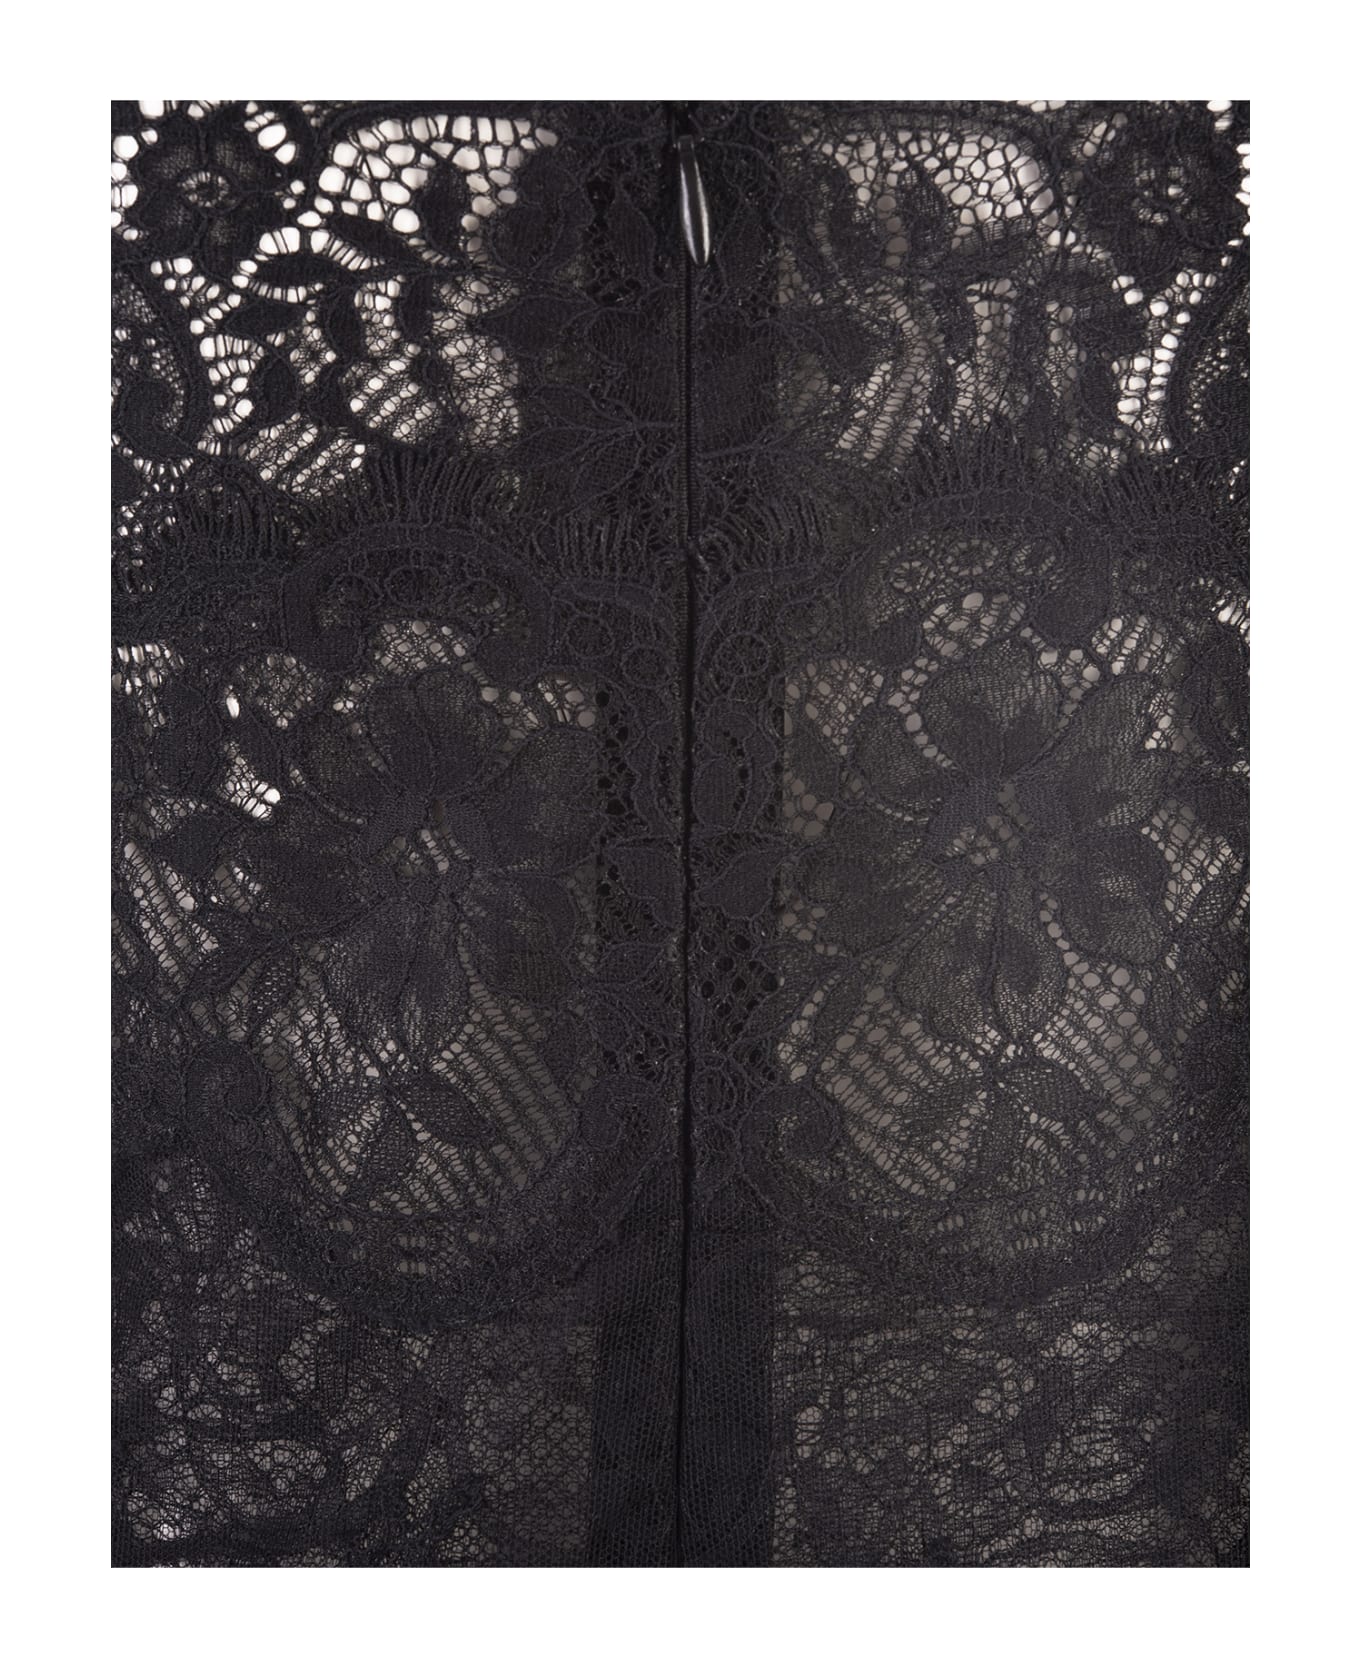 Ermanno Scervino All-over Black Lace Lingerie Dress - Black ランジェリー＆パジャマ